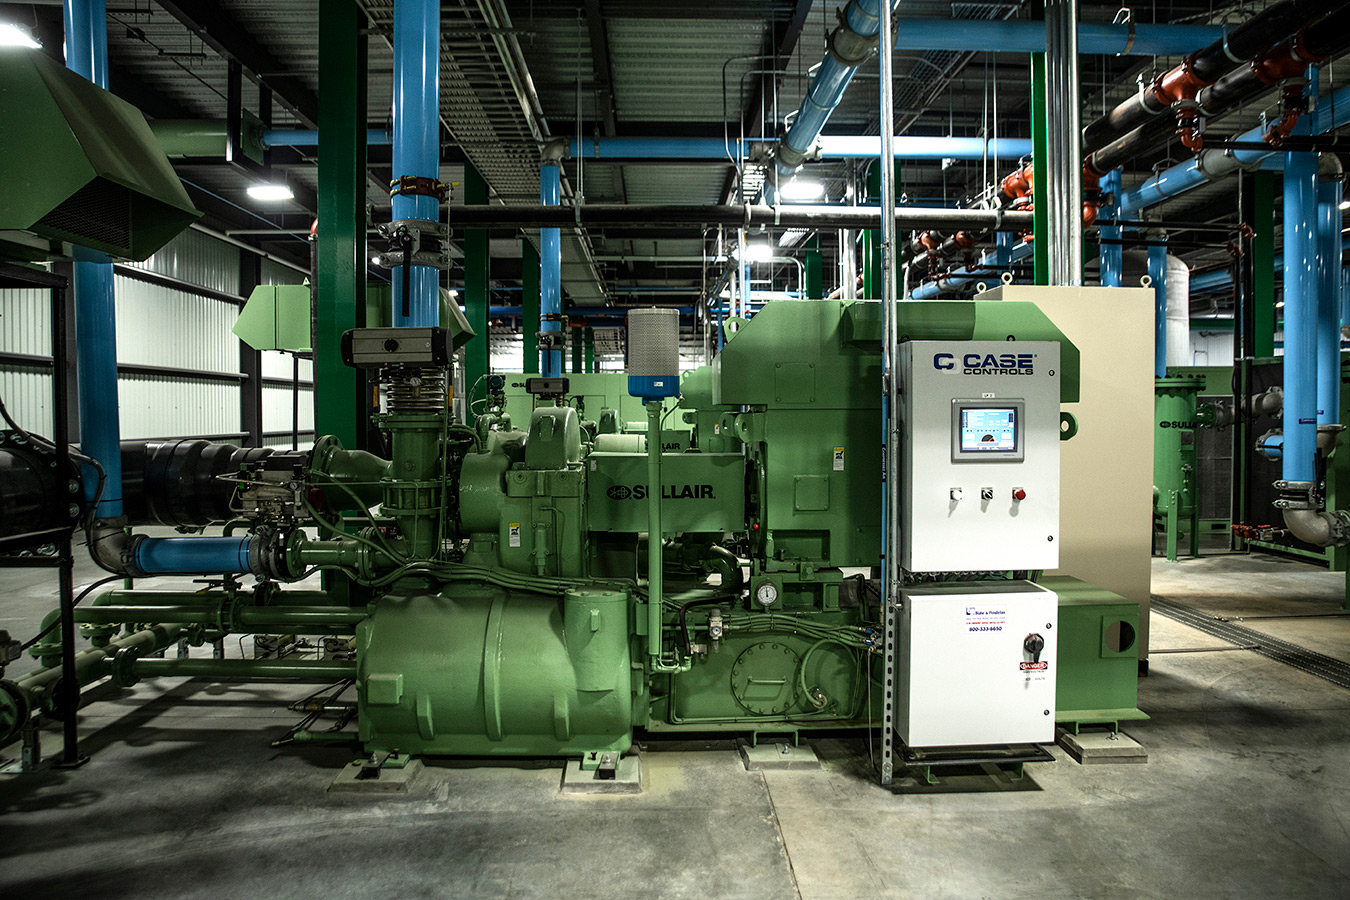 Modern centrifugal compressors offer energy savings, oil free operations and longevity making them worth a second look.